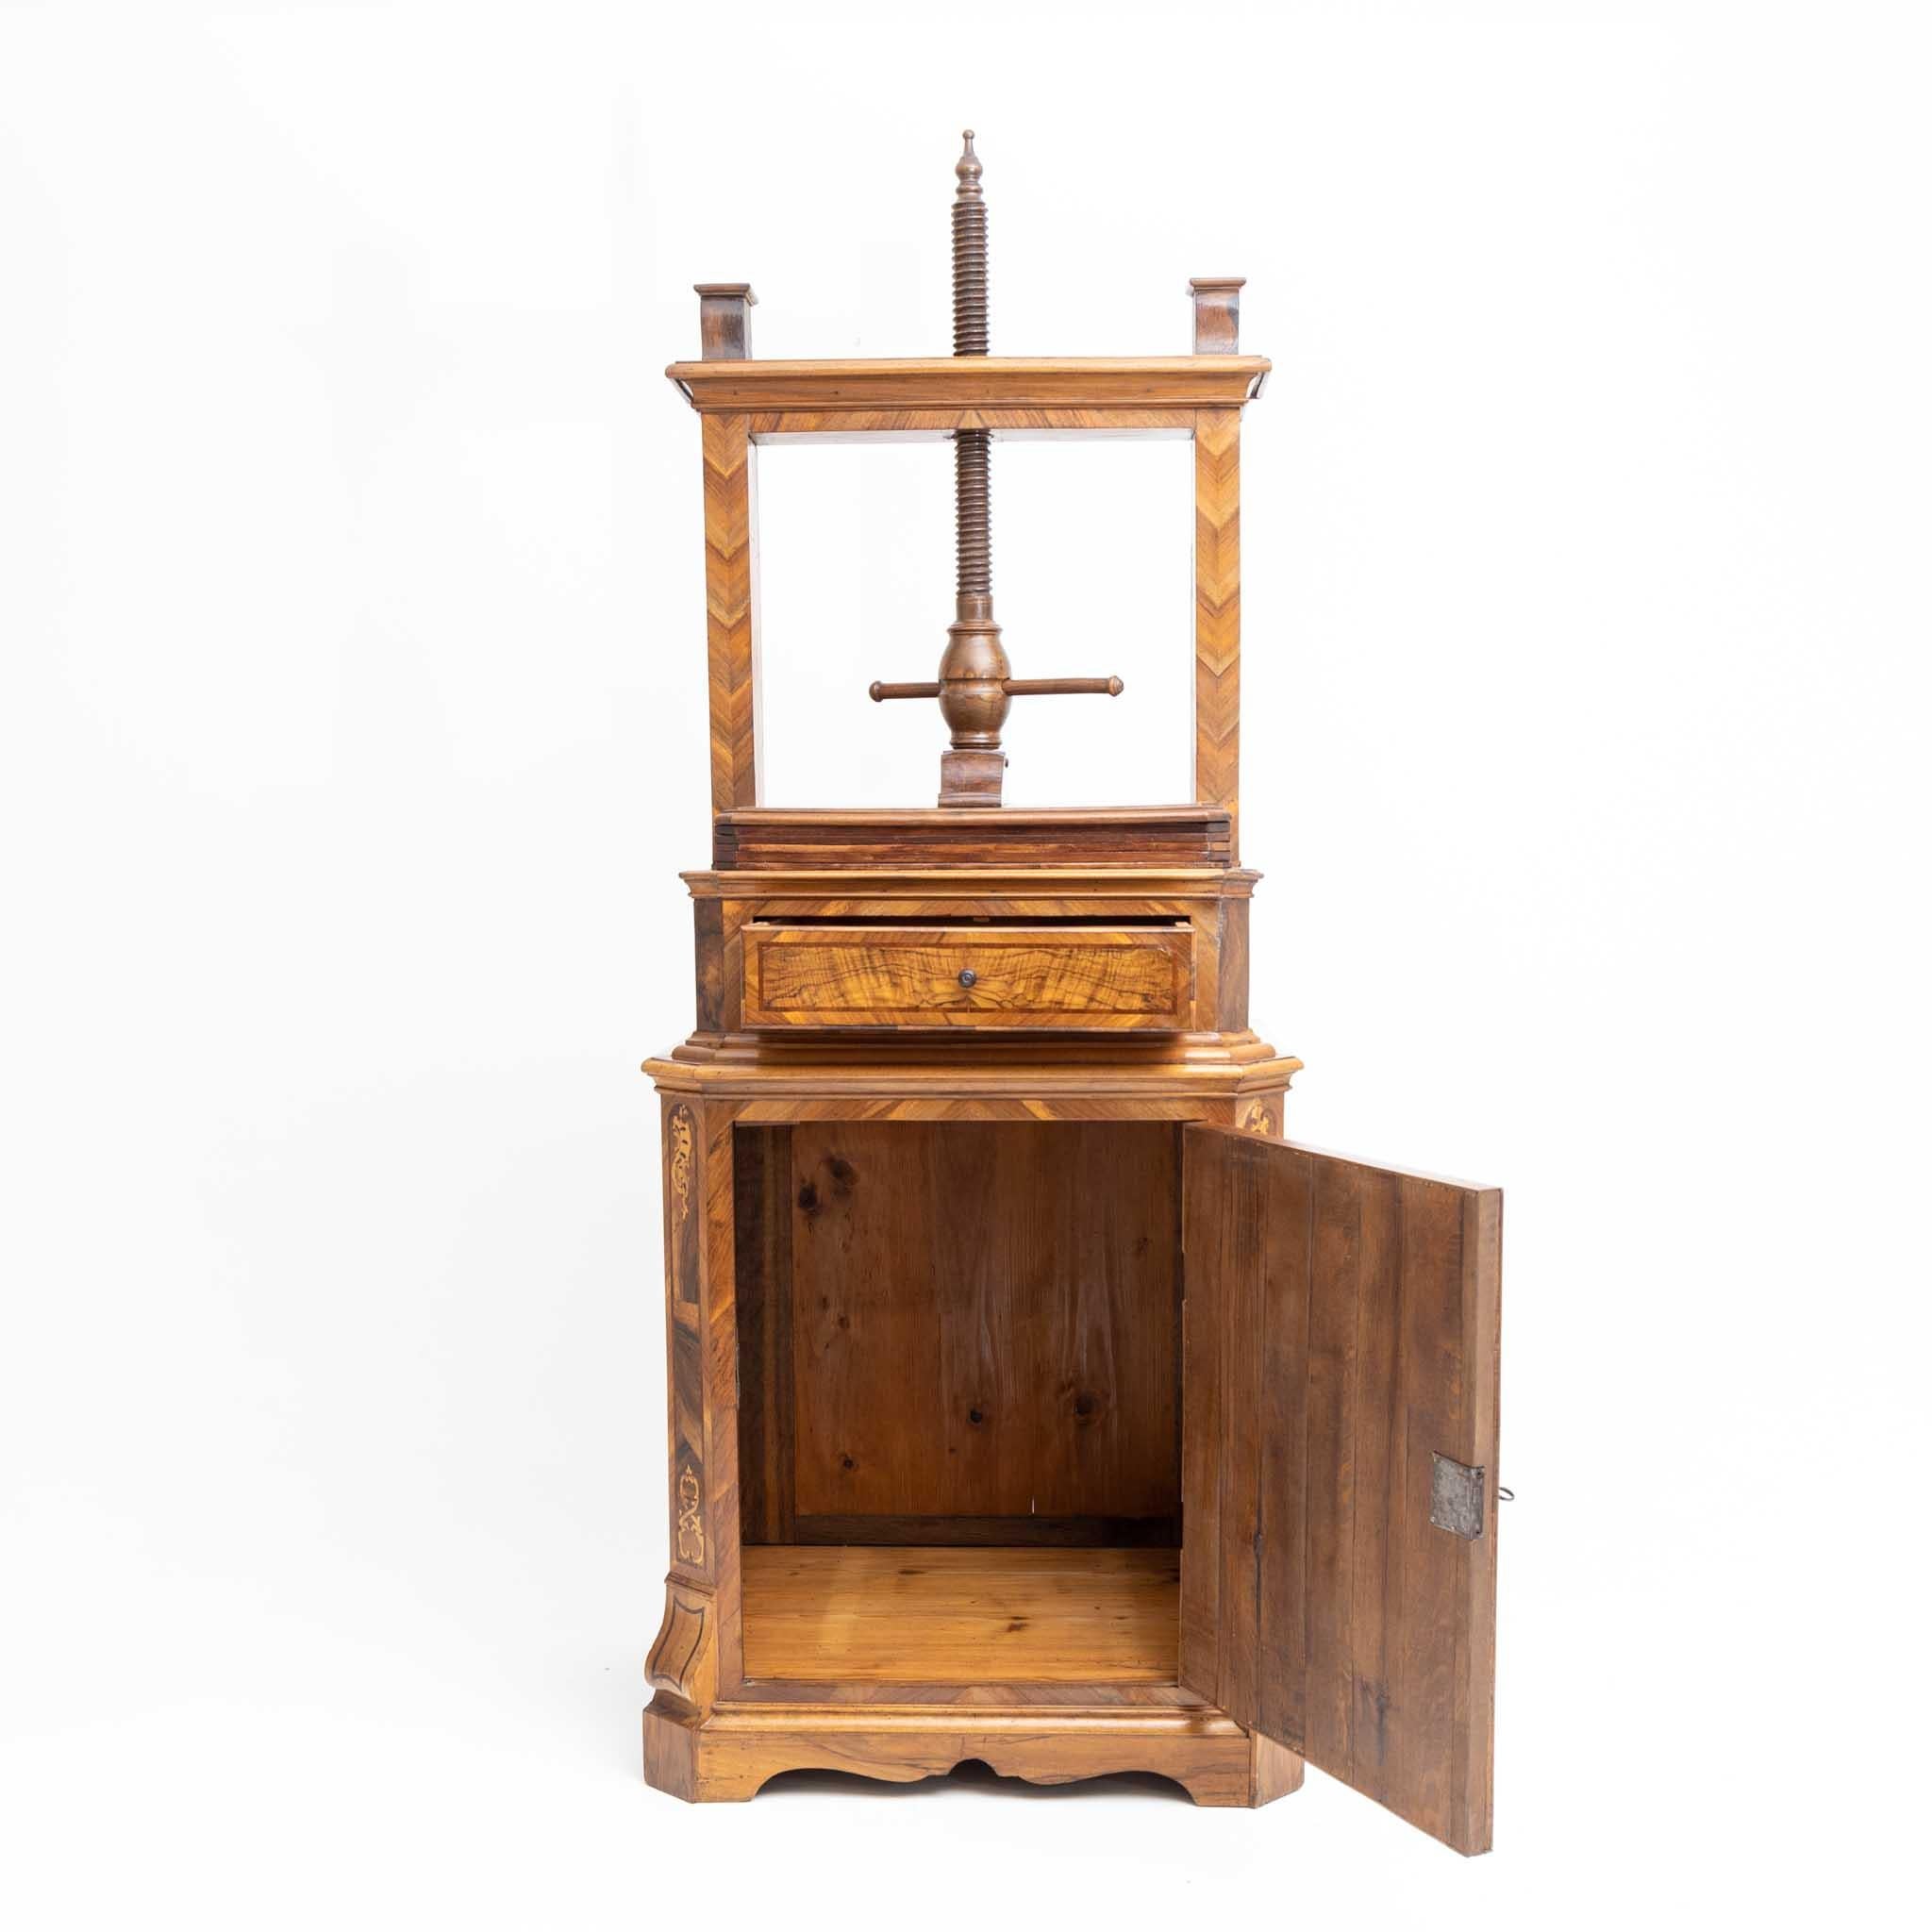 Linen Press with Spindle, Walnut with Inlays, 18th Century For Sale 2